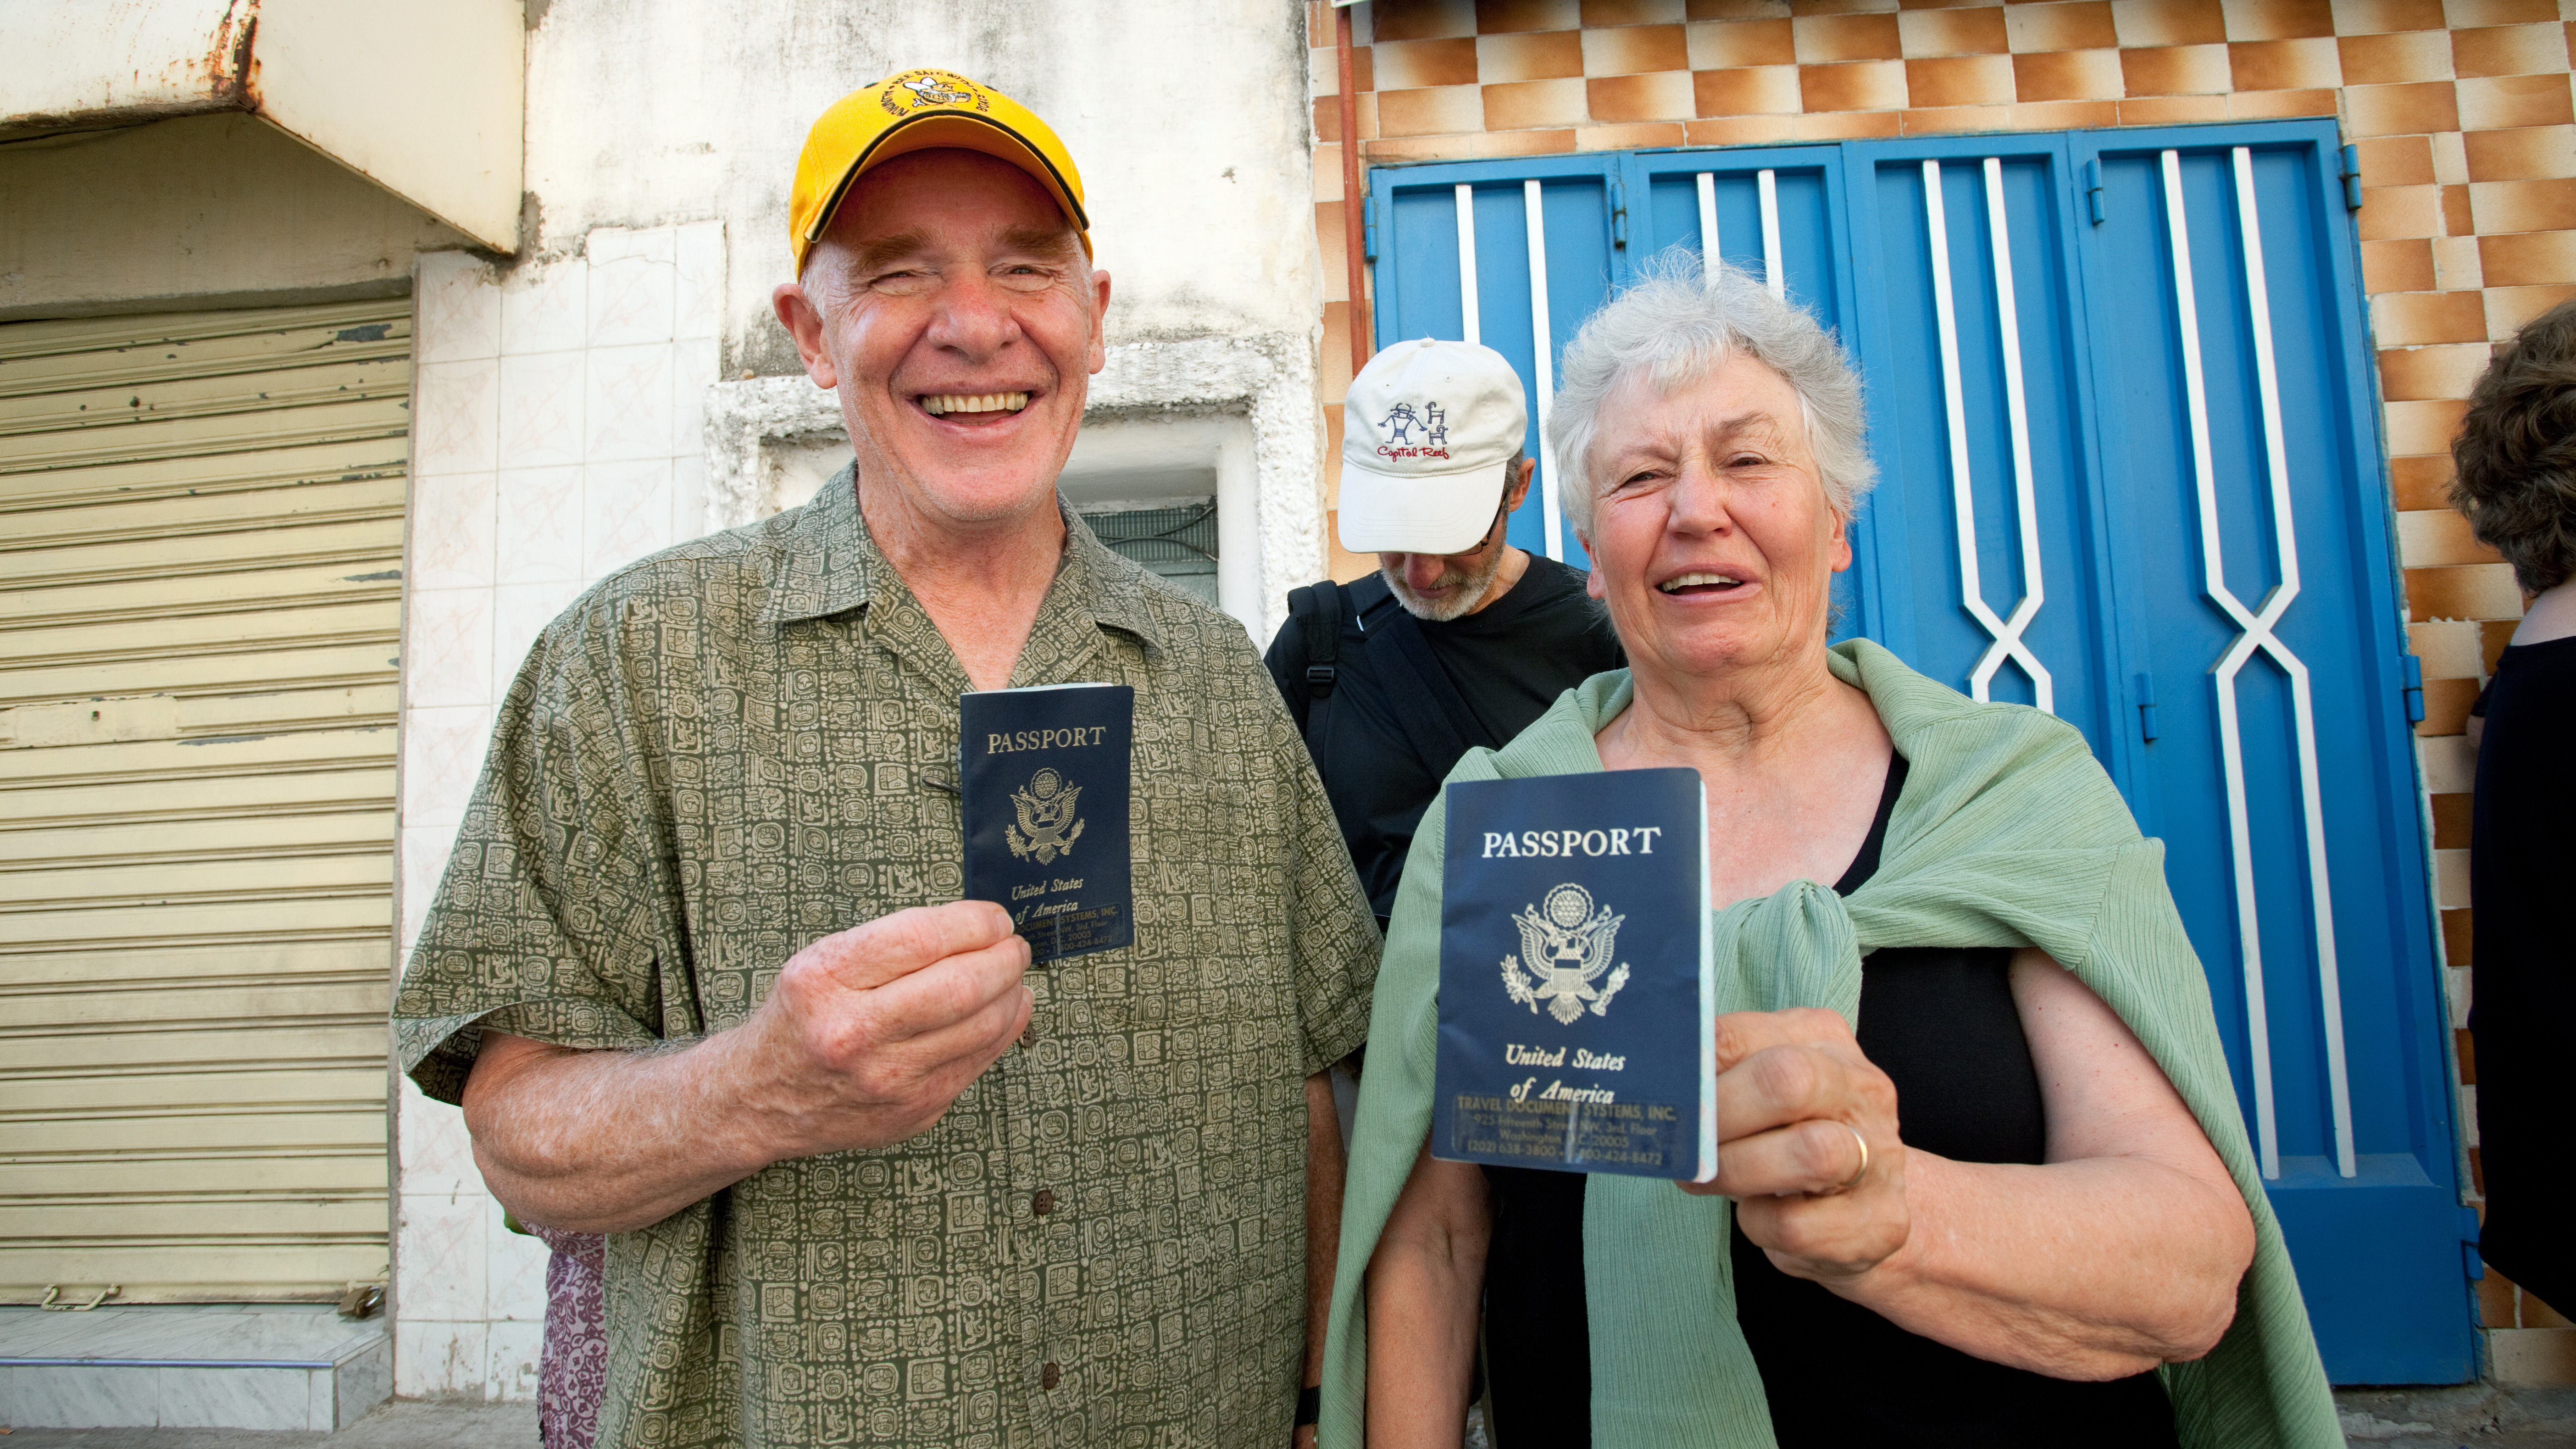 Getting Your Travel Documents Together by Rick Steves